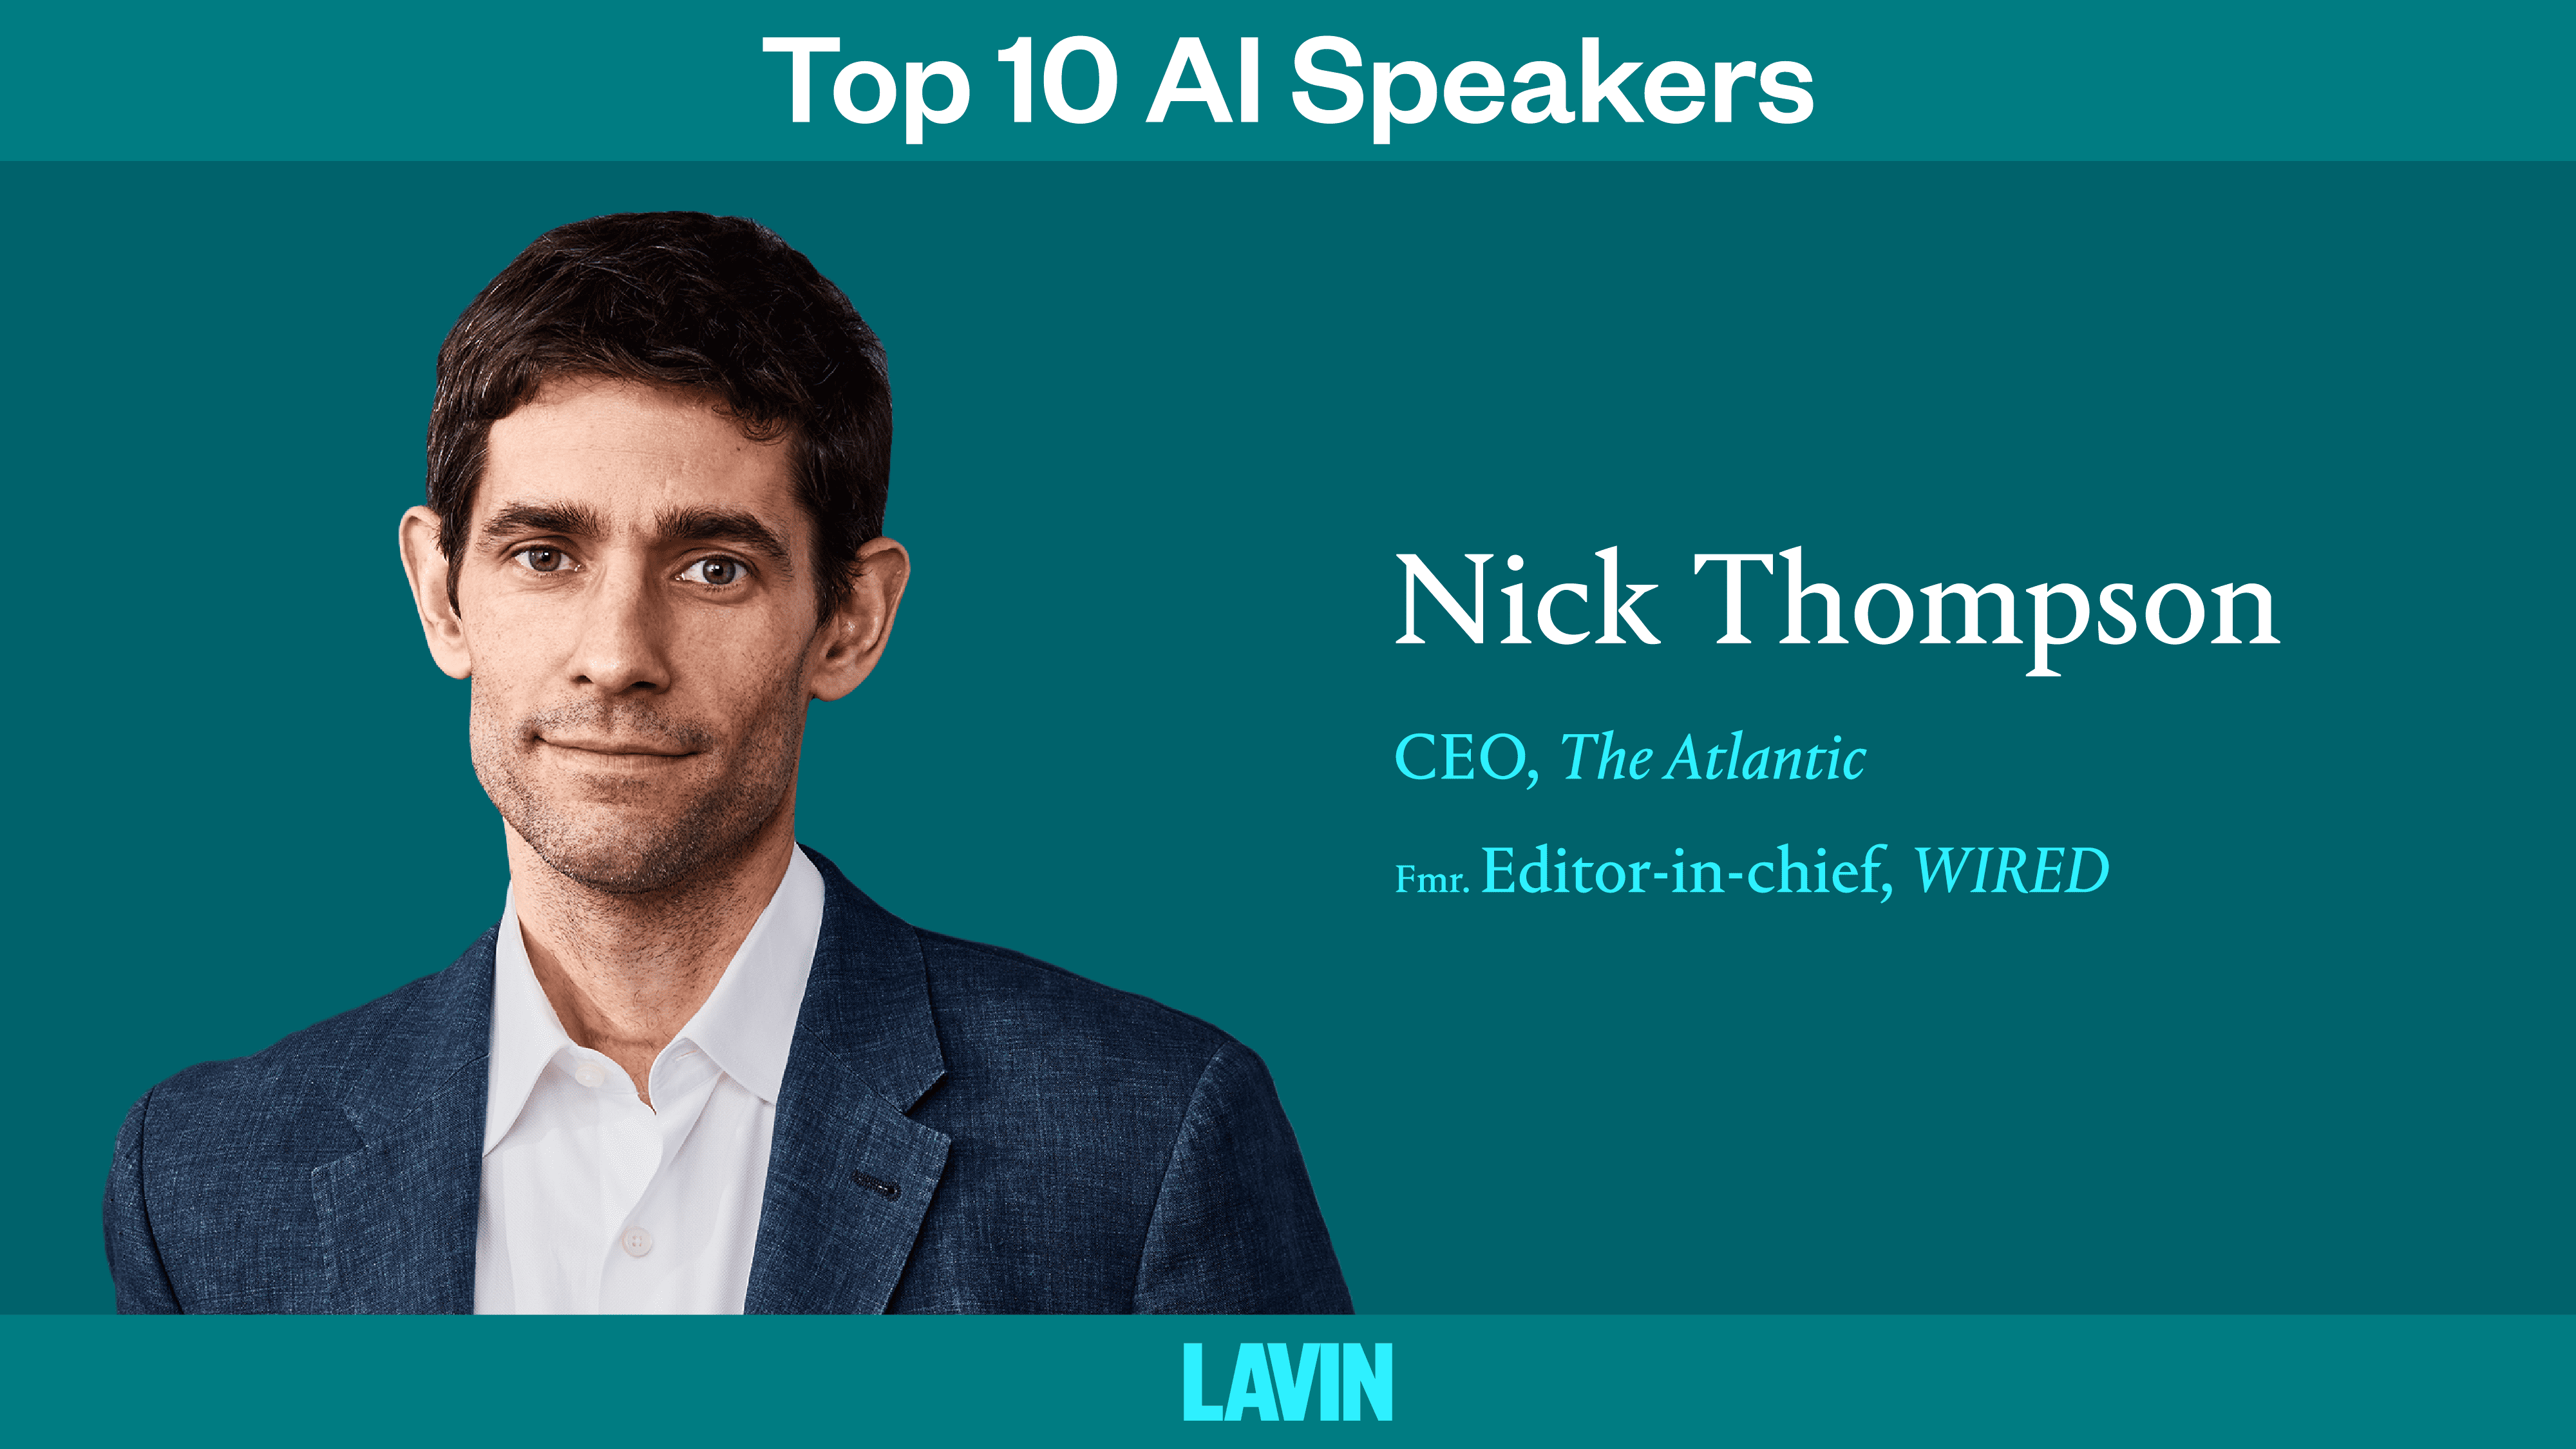 Top 10 AI Speaker Nicholas Thompson: Behind the Scenes of the Silicon Valley Giants’ AI Strategy